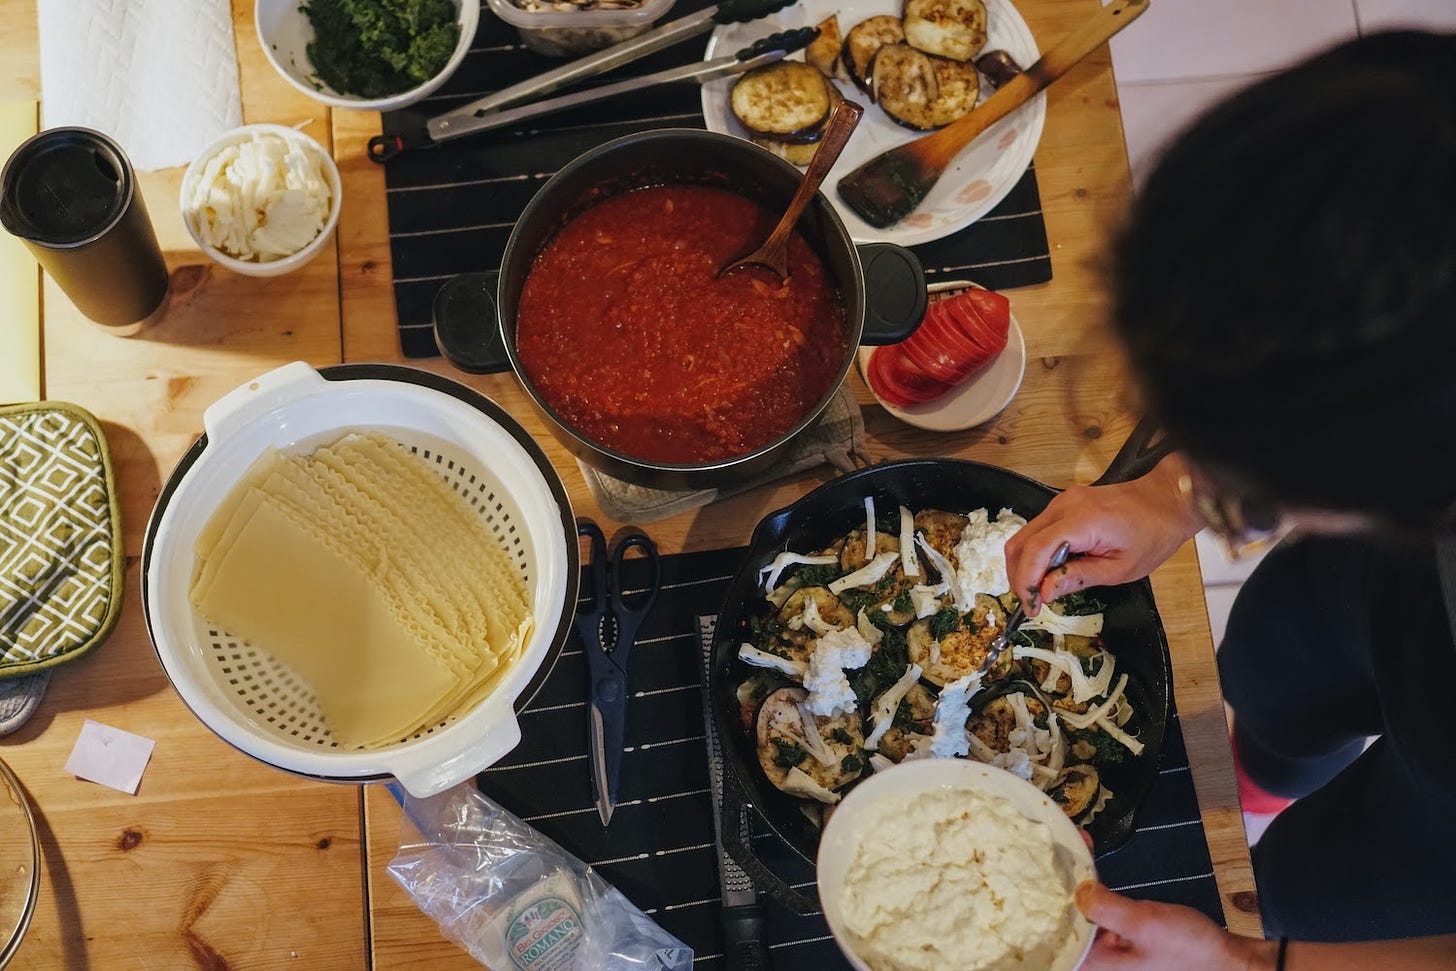 Ingredients for lasagna being assembled in a cast iron